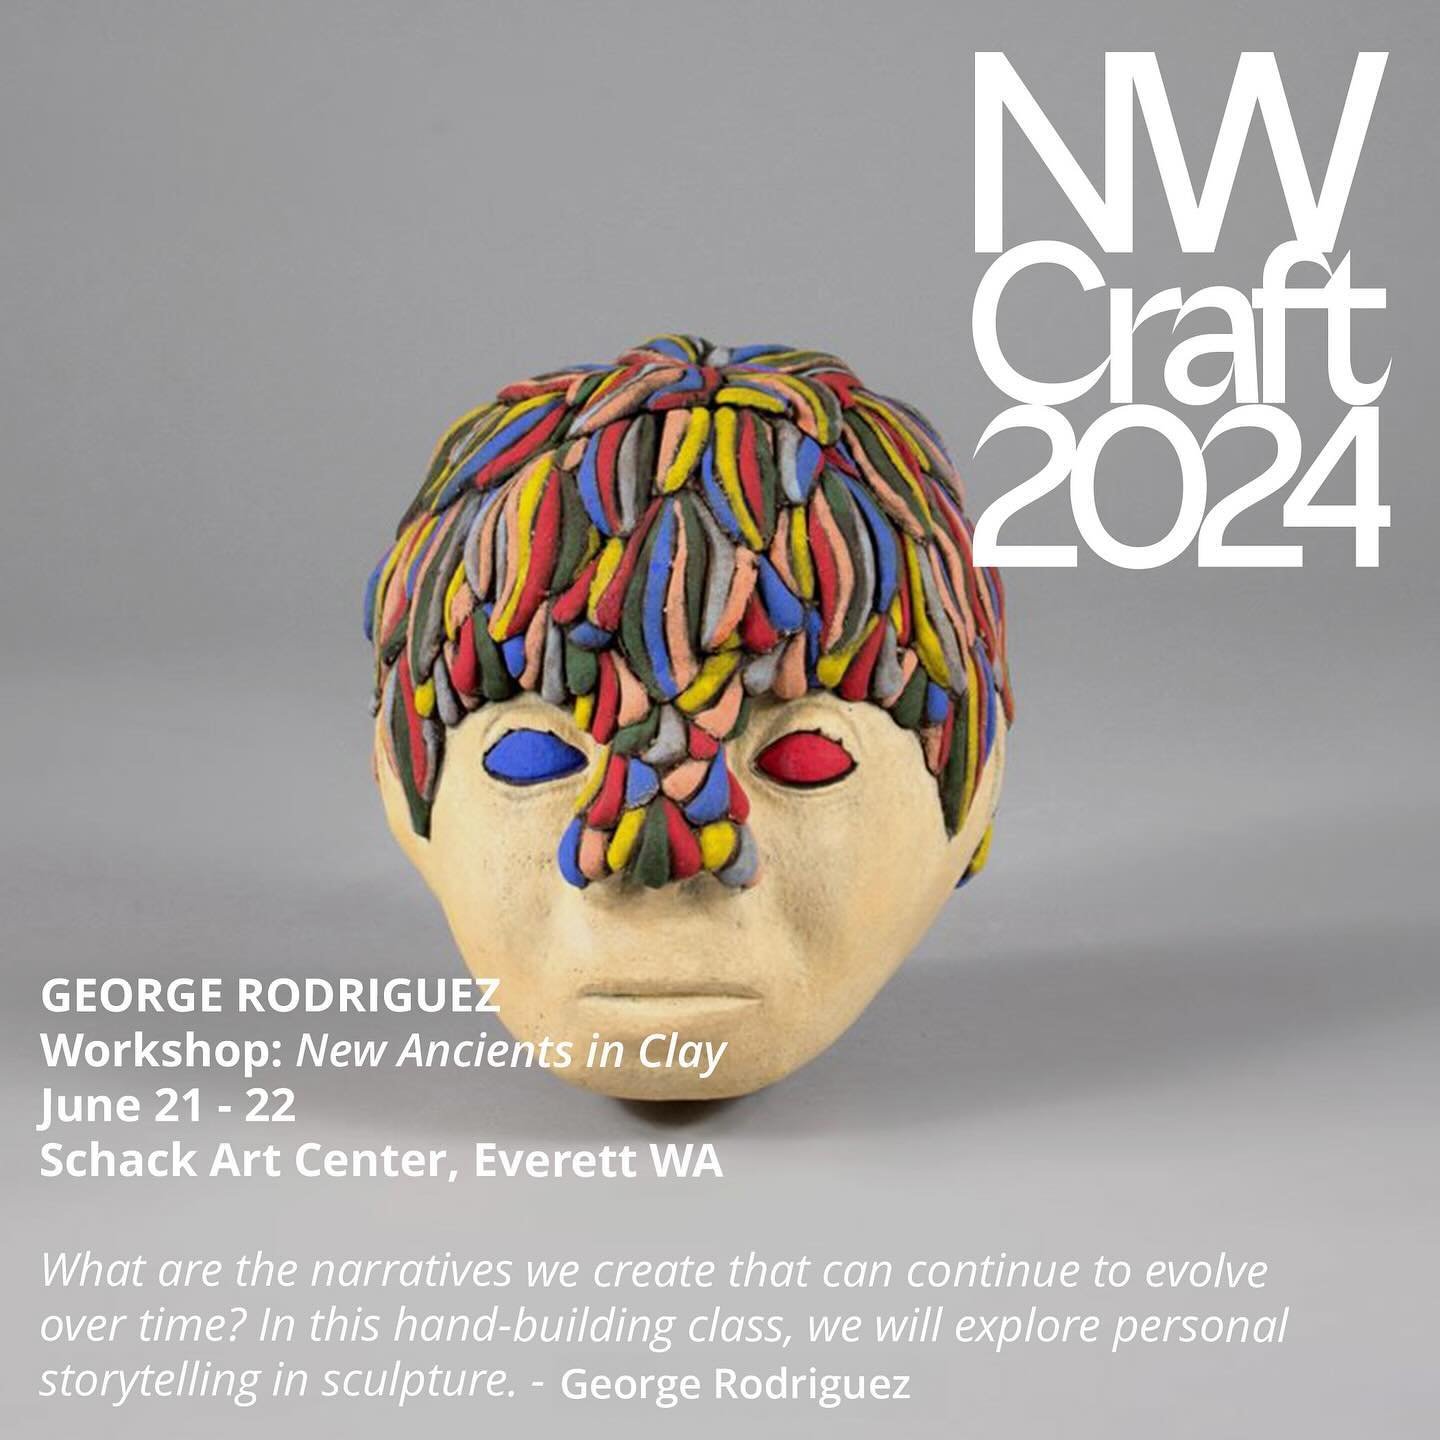 NWCraft24 | June 20 - August 24, 2024
REGISTER TODAY!
Masterclasses and Demonstrations
June 21 - 23, 2024 at Schack Art Center

This is an opportunity for the public to learn and be inspired by the rich community of craft artists in the Northwest and